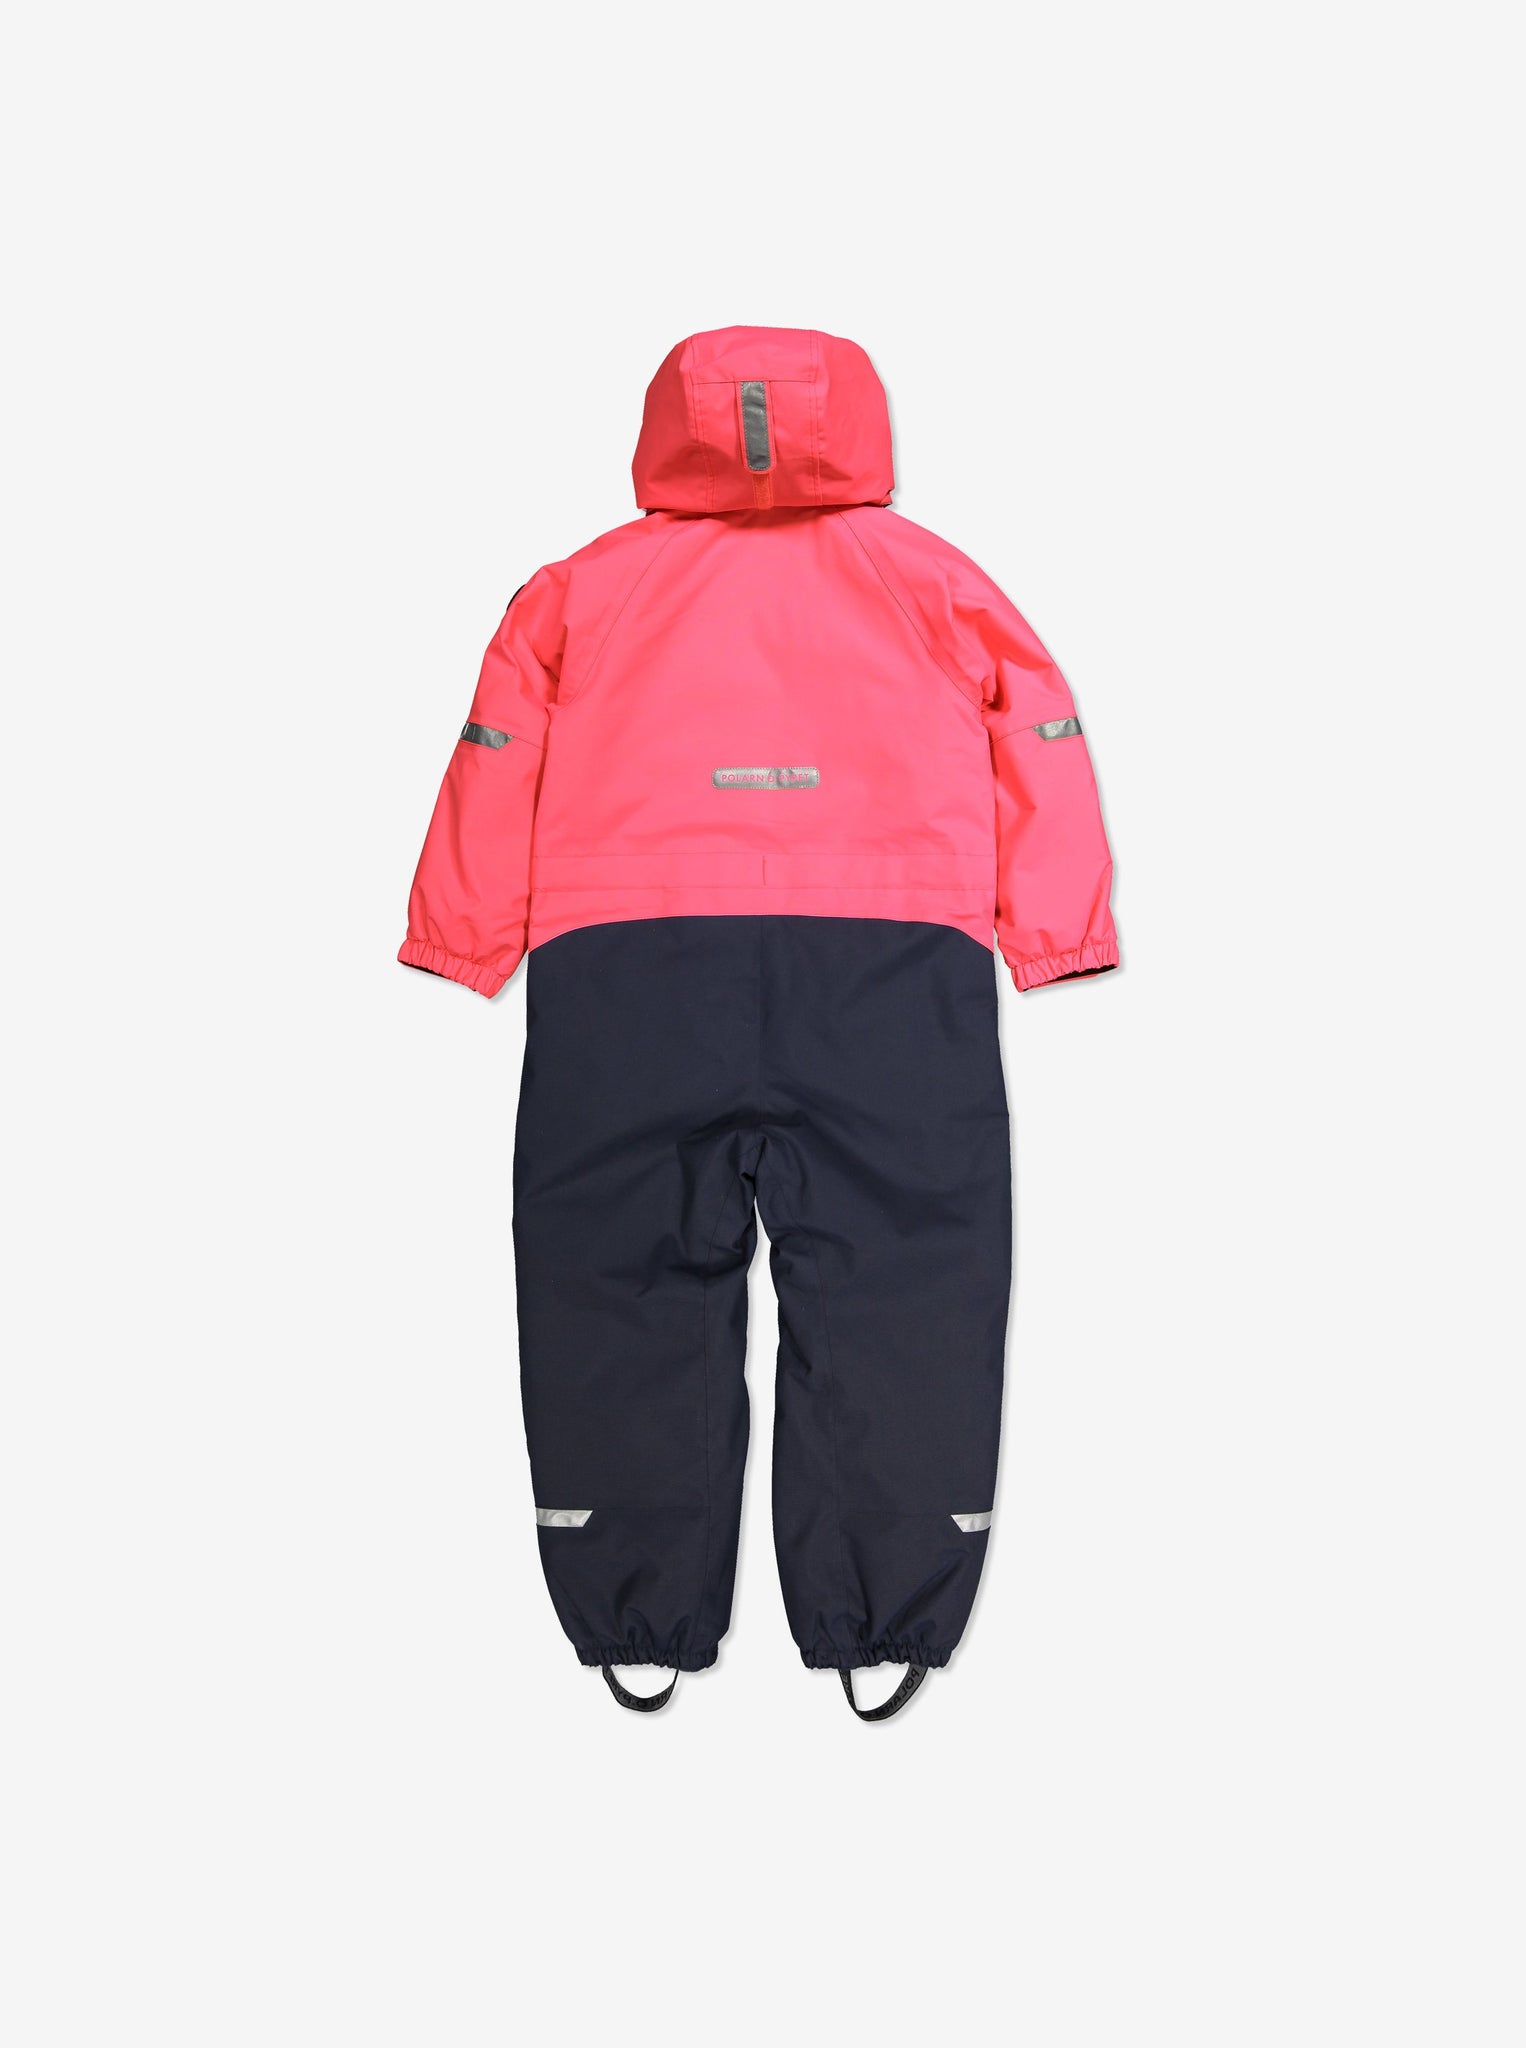 Padded Winter Kids Overall-1-6y-Pink-Girl